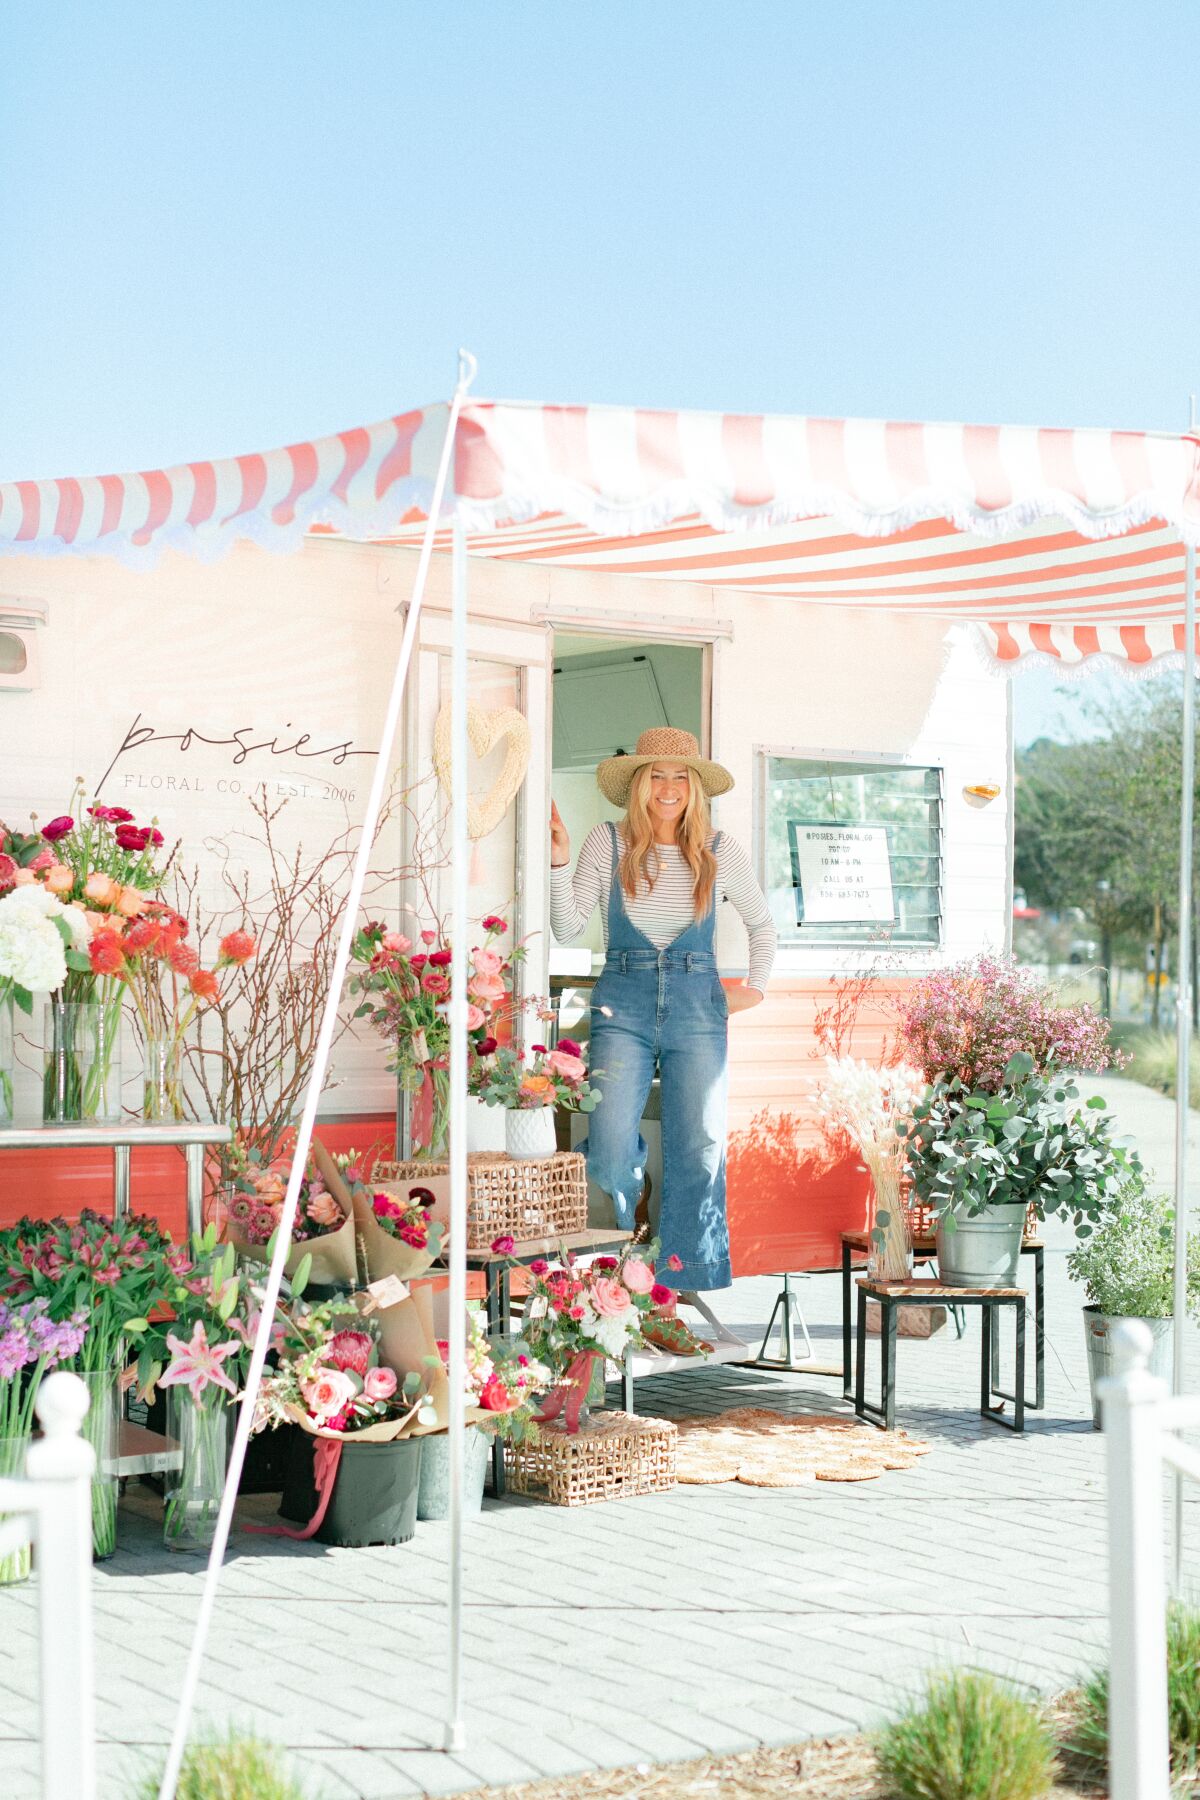 Posie's Floral Company will have a pop-up at One Paseo from Feb. 9-14.